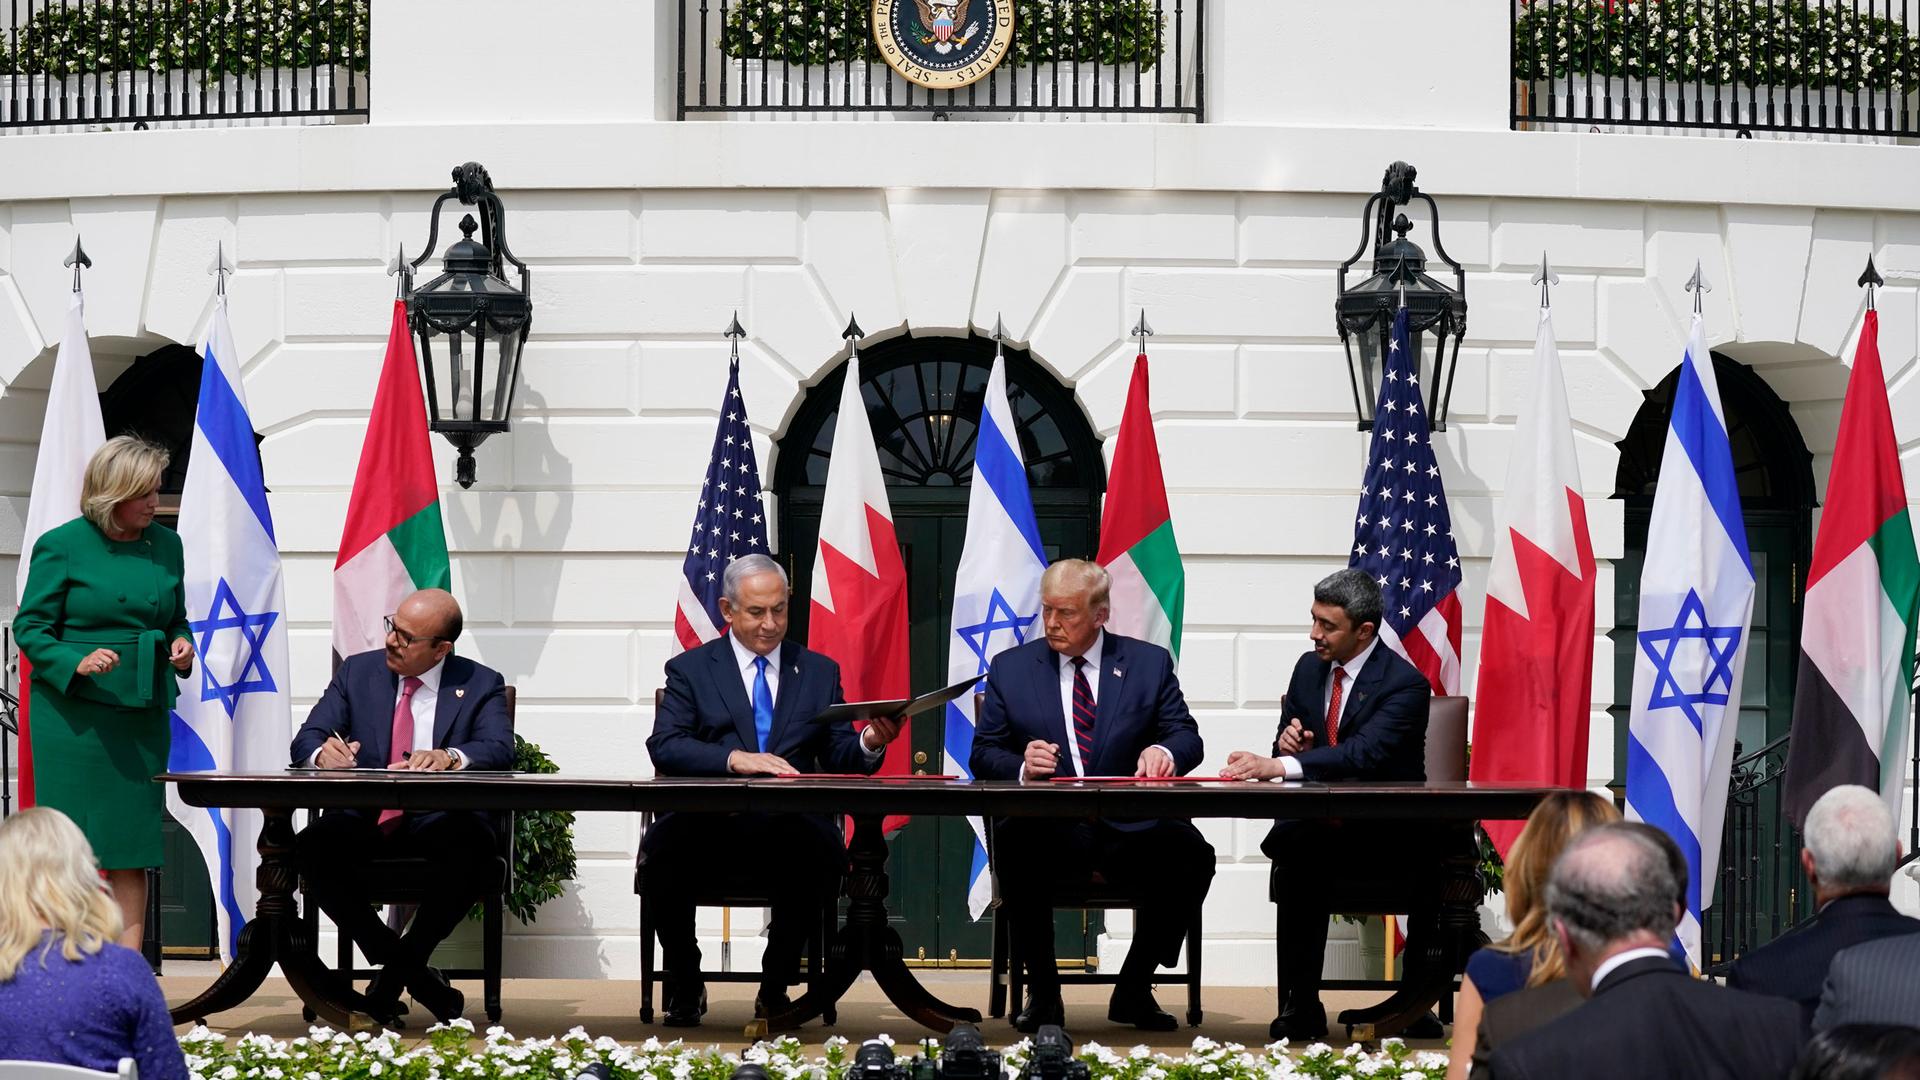 The leaders of the US, UAE, Israel and Bahrain are shown wearing suits and sitting at a table signing documents with flags from each country behind them.